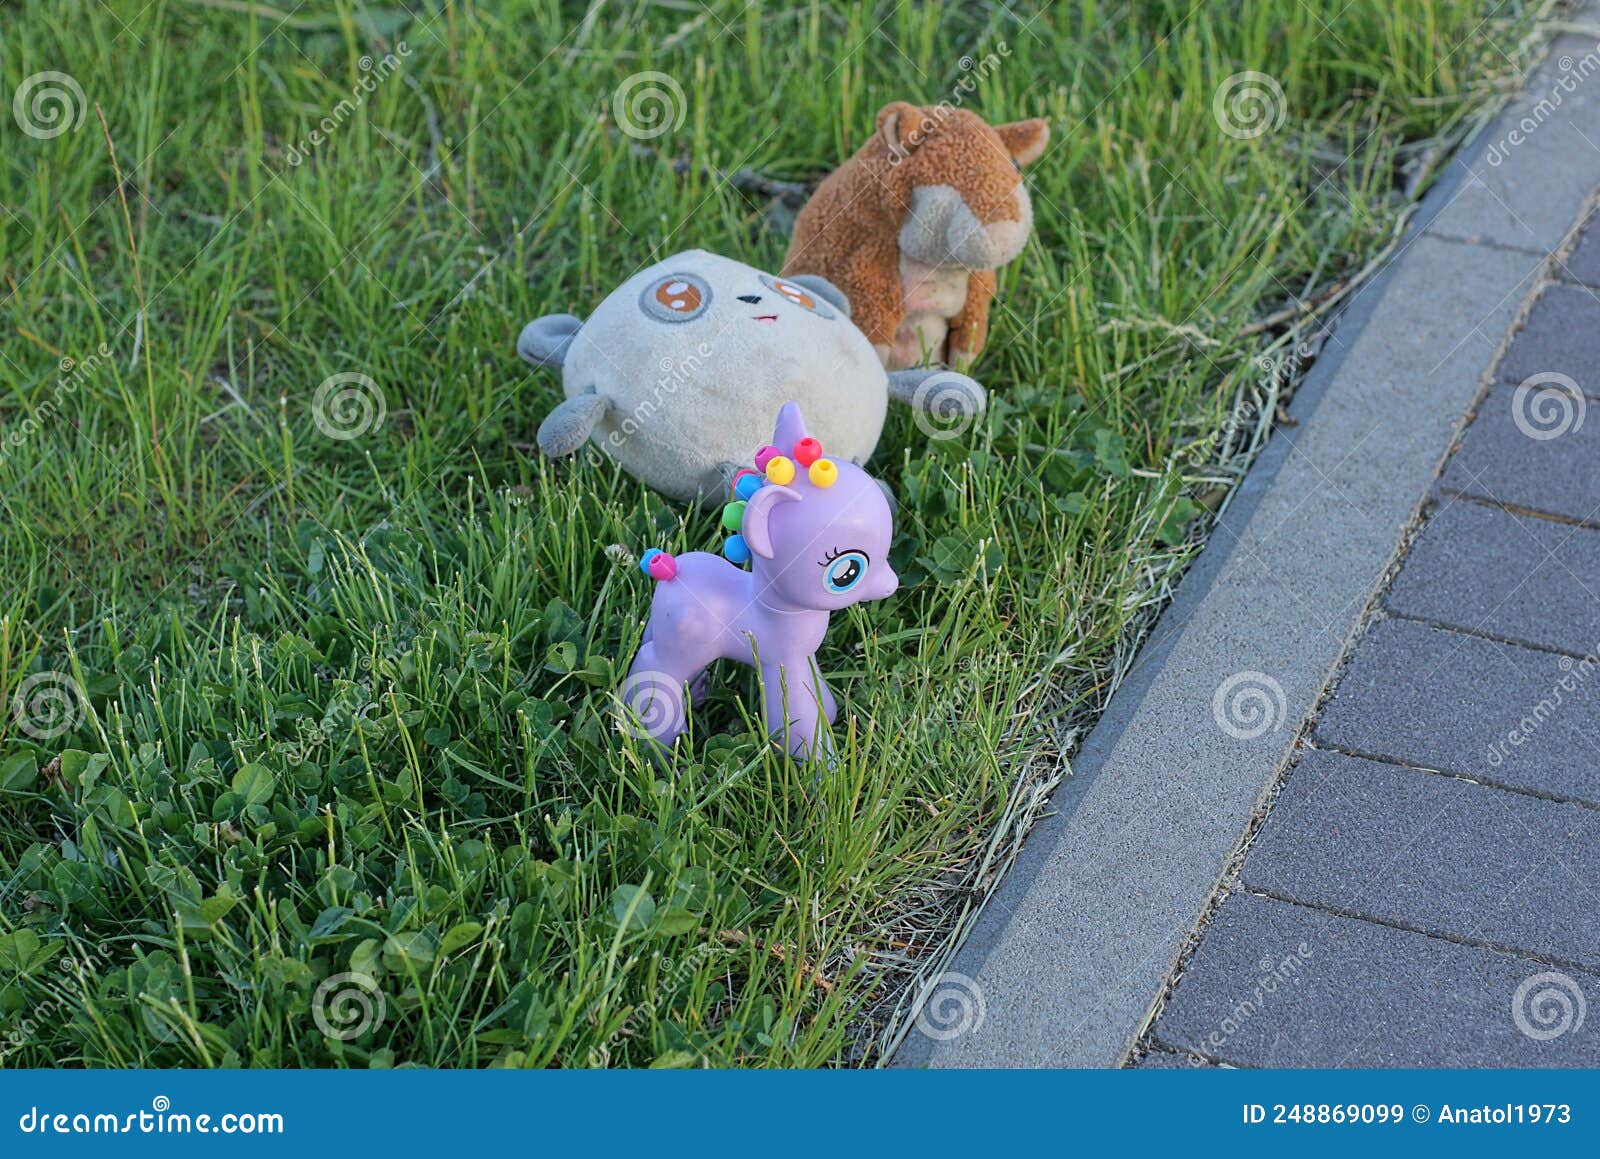 A Set Of Three Toys With A Purple Plastic Unicorn And Teddy Bears Stock Image Image Of Design